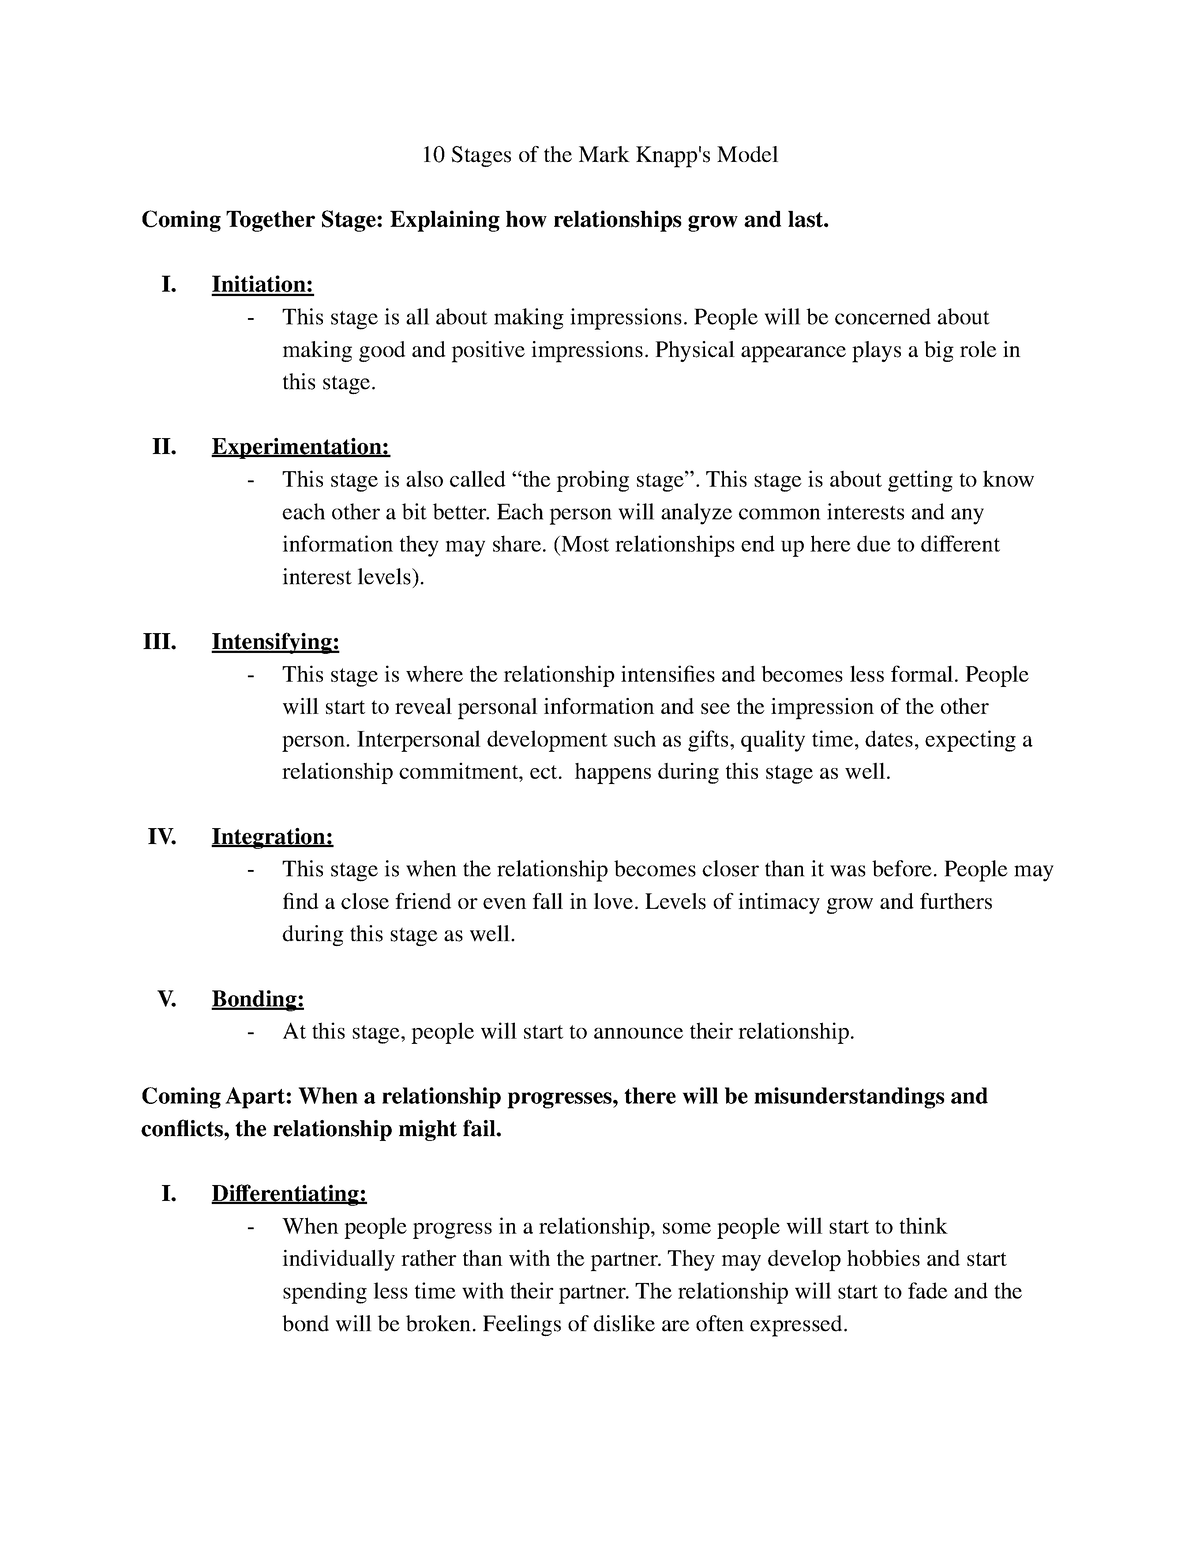 10 Stages of the Mark Knapps Model Research - 10 Stages of the Mark ...